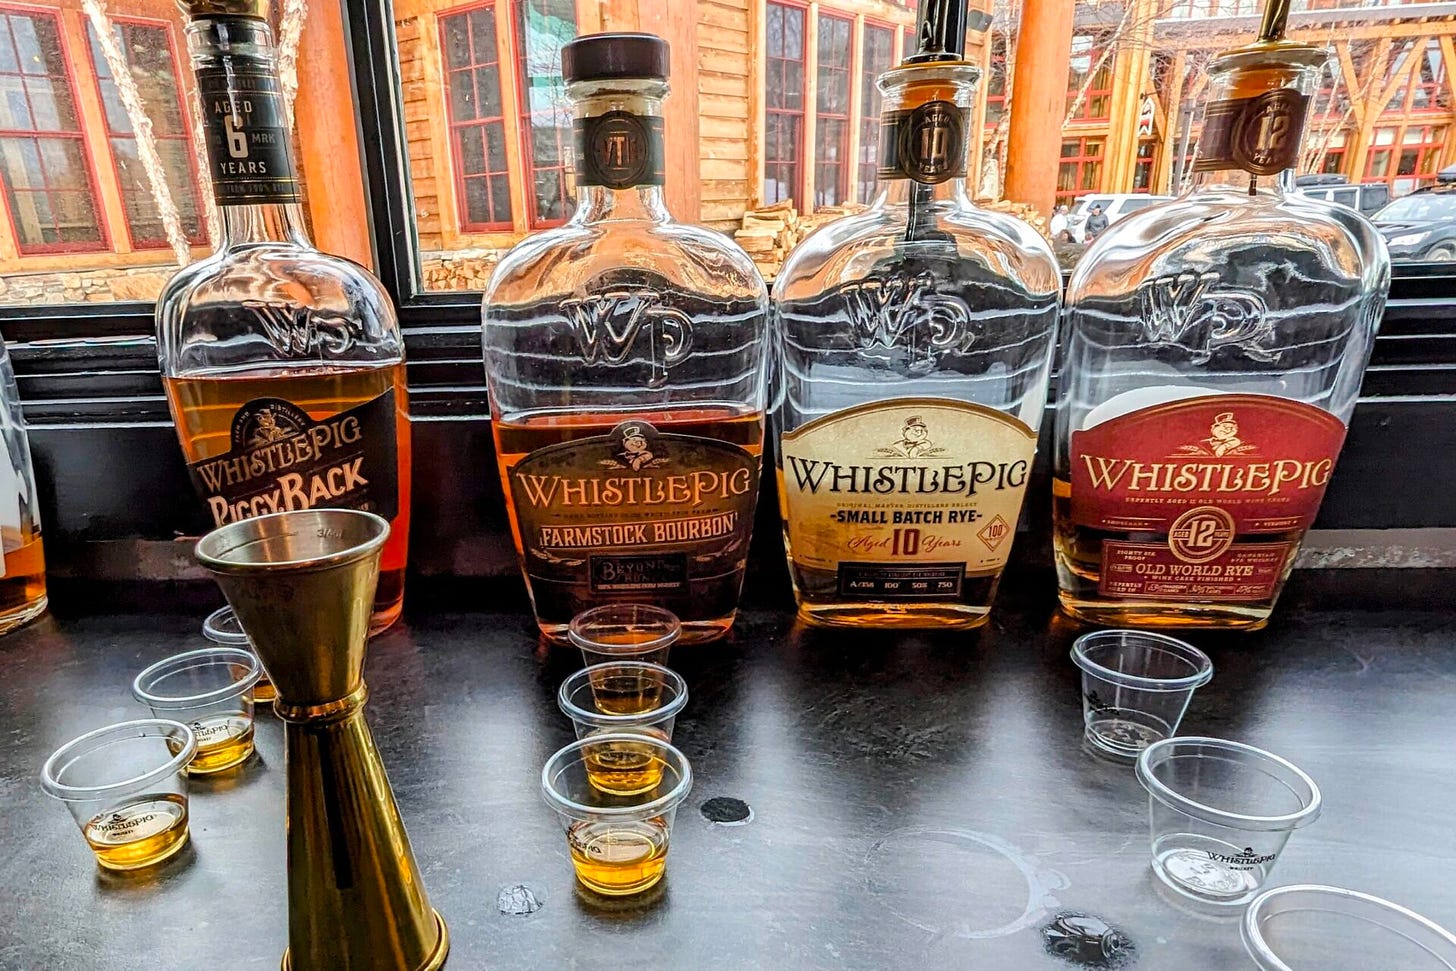 WhistlePig products with plastic tasting cups